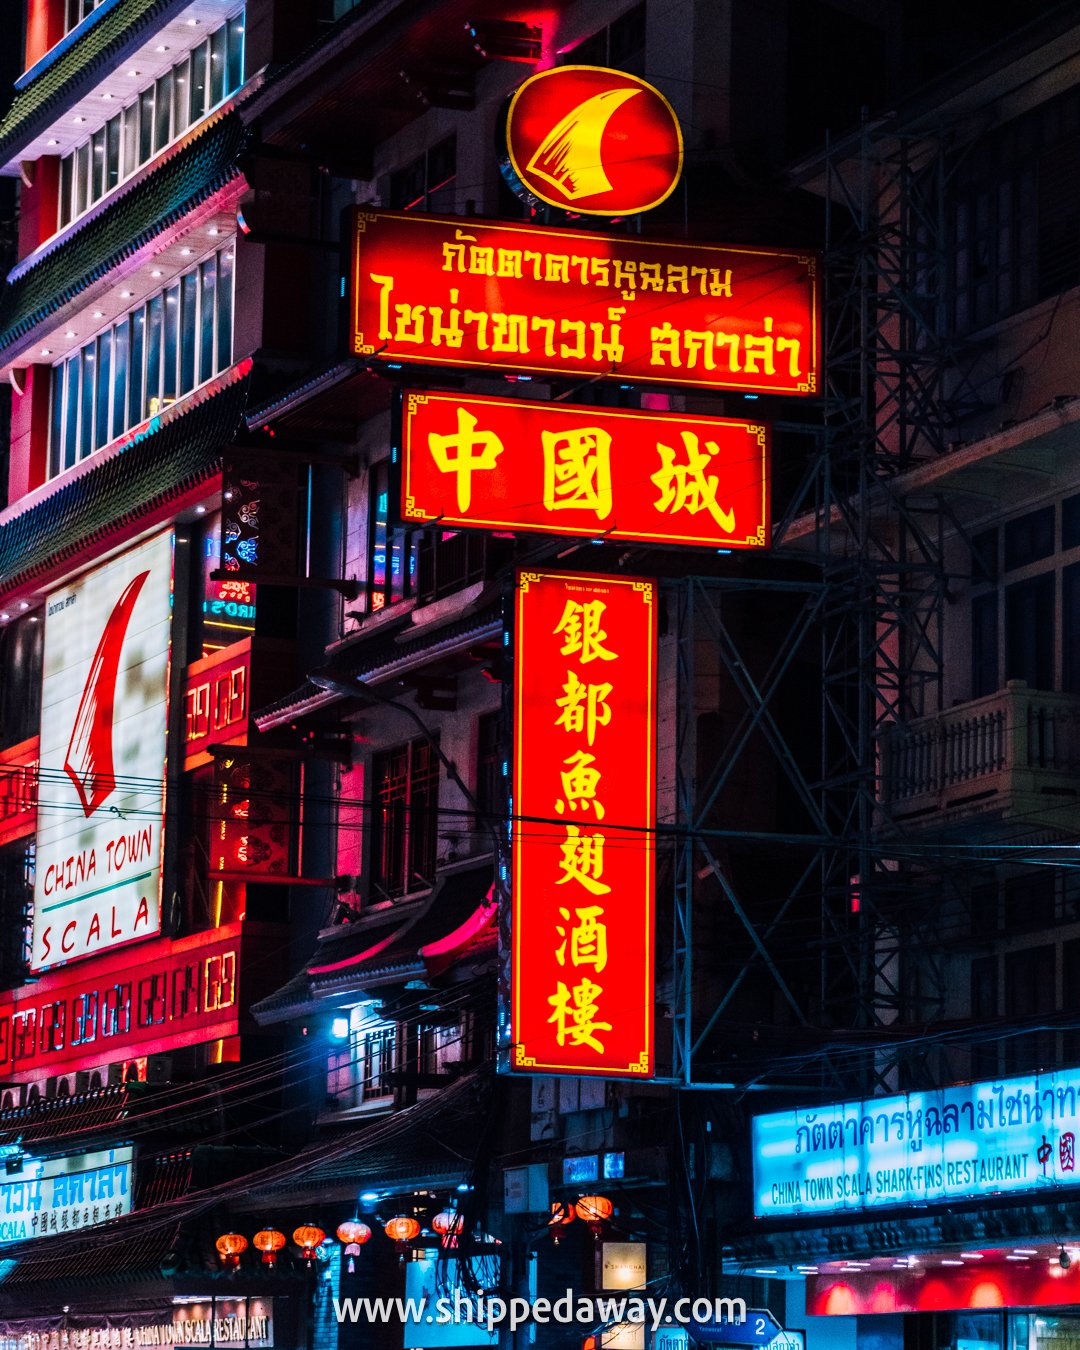 Neon lights and signs at night in Chinatown Bangkok Thailand, how to get to chinatown in bangkok, best way to get to chinatown in bangkok, chinatown bangkok guide